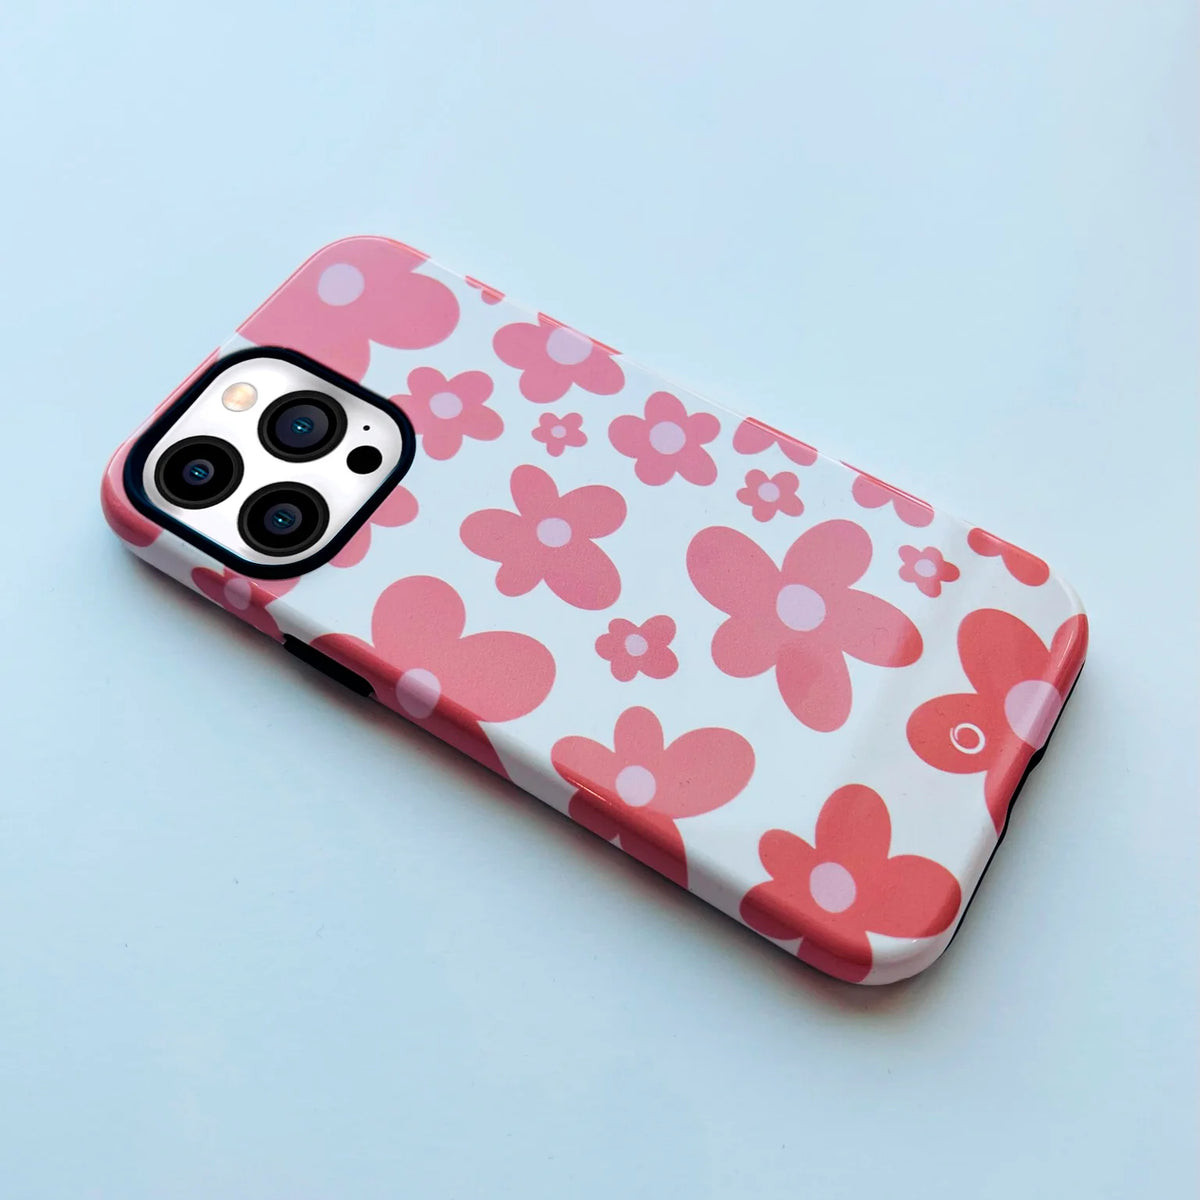 Floral Fiesta iPhone Case - iPhone 12 Pro Max